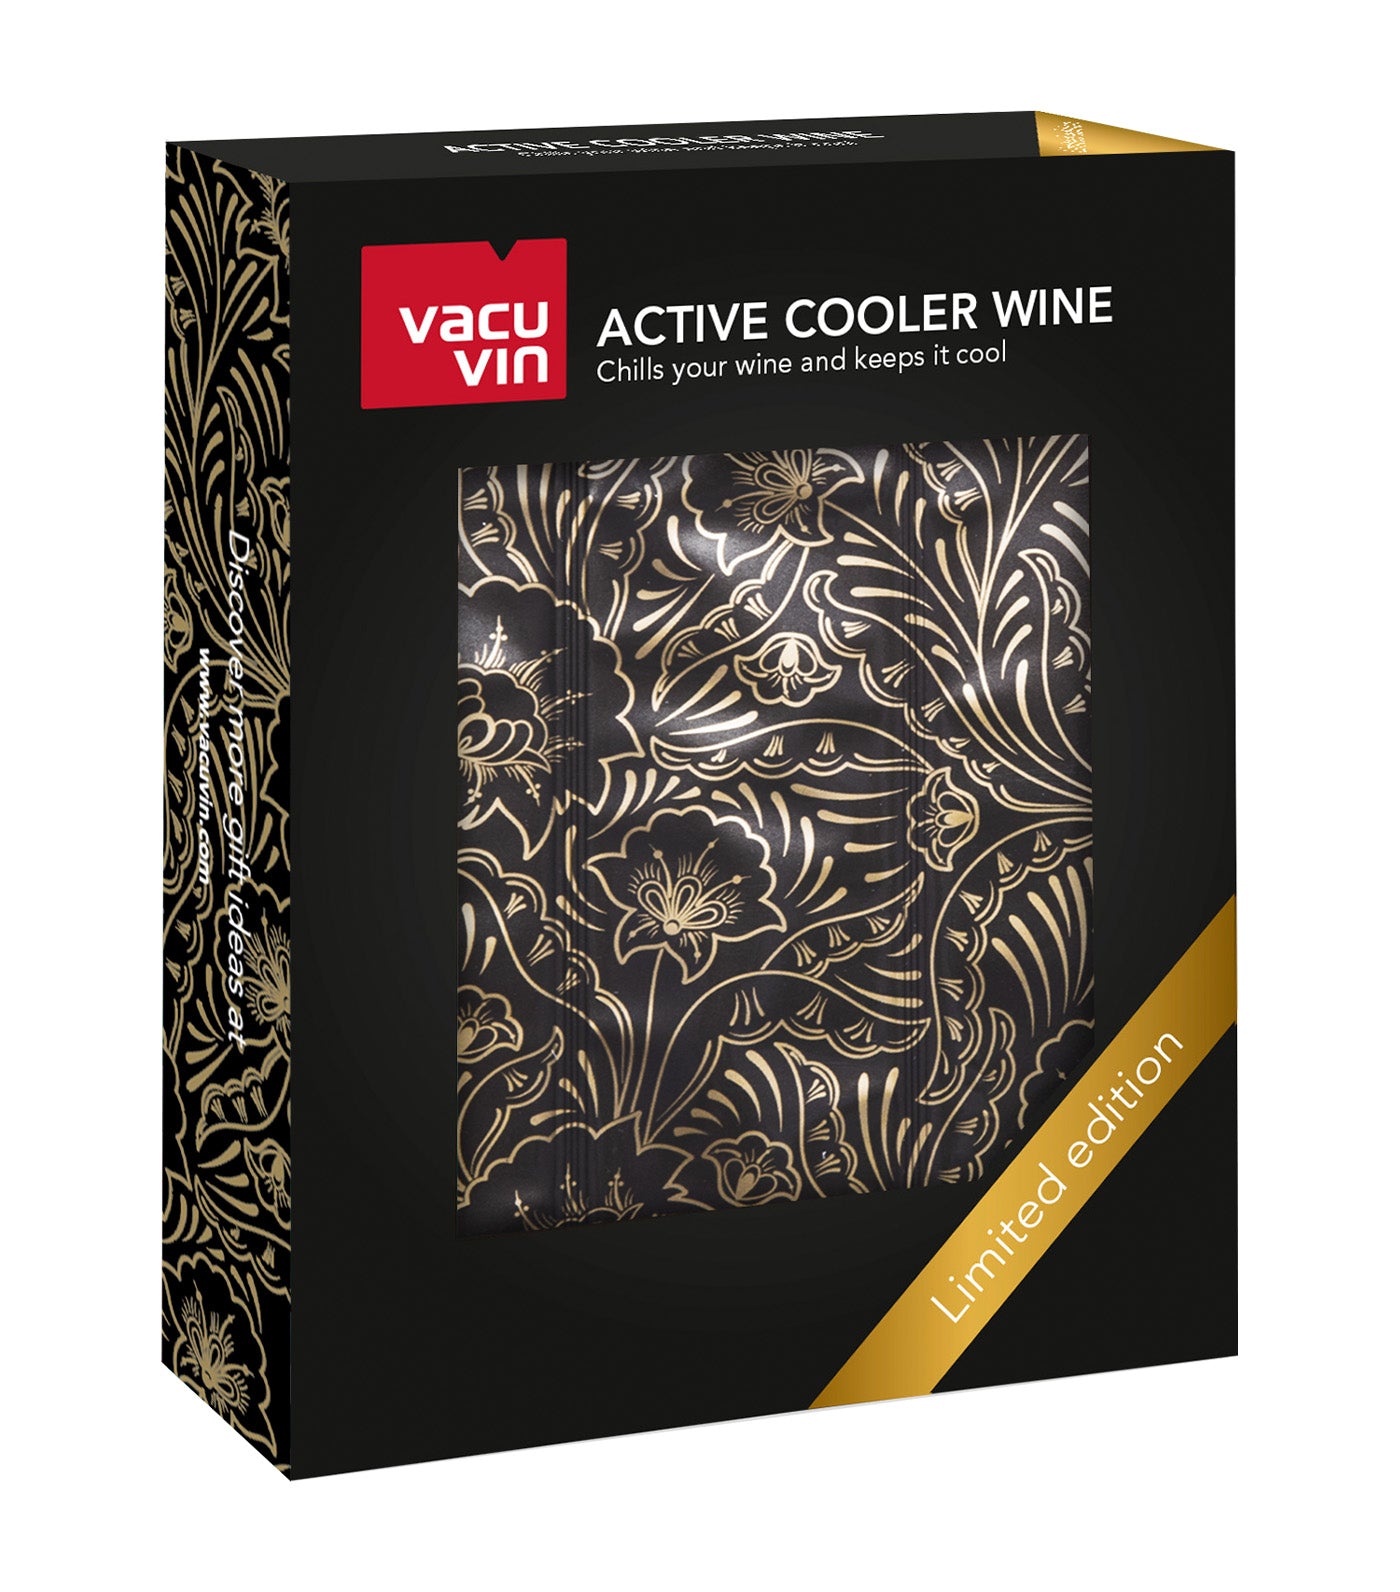 Active Cooler Wine Royal Gold Limited Edition